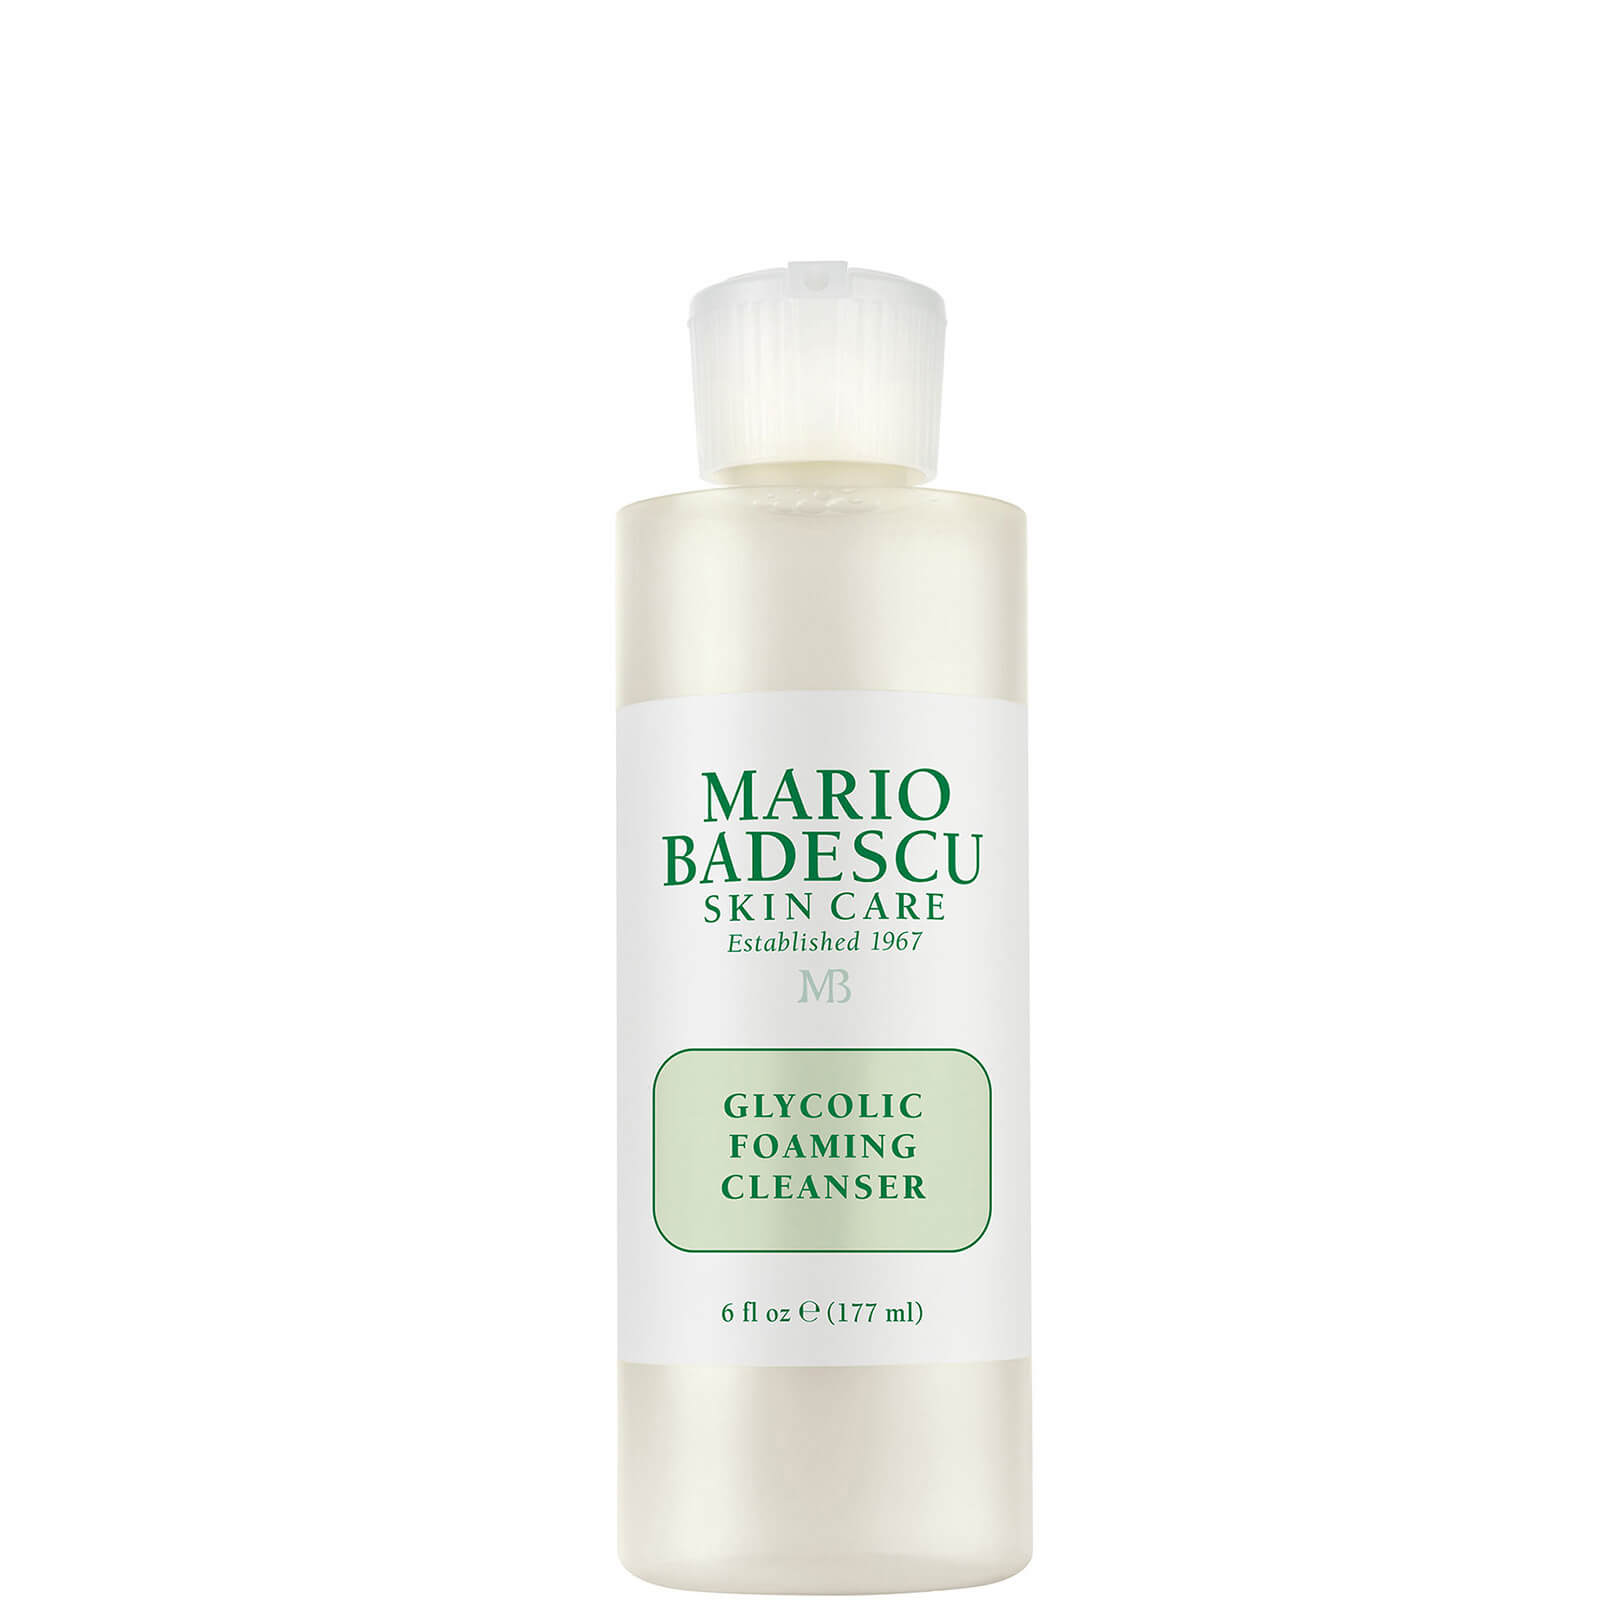 Photos - Facial / Body Cleansing Product Mario Badescu Glycolic Foaming Cleanser - 177ml 1429